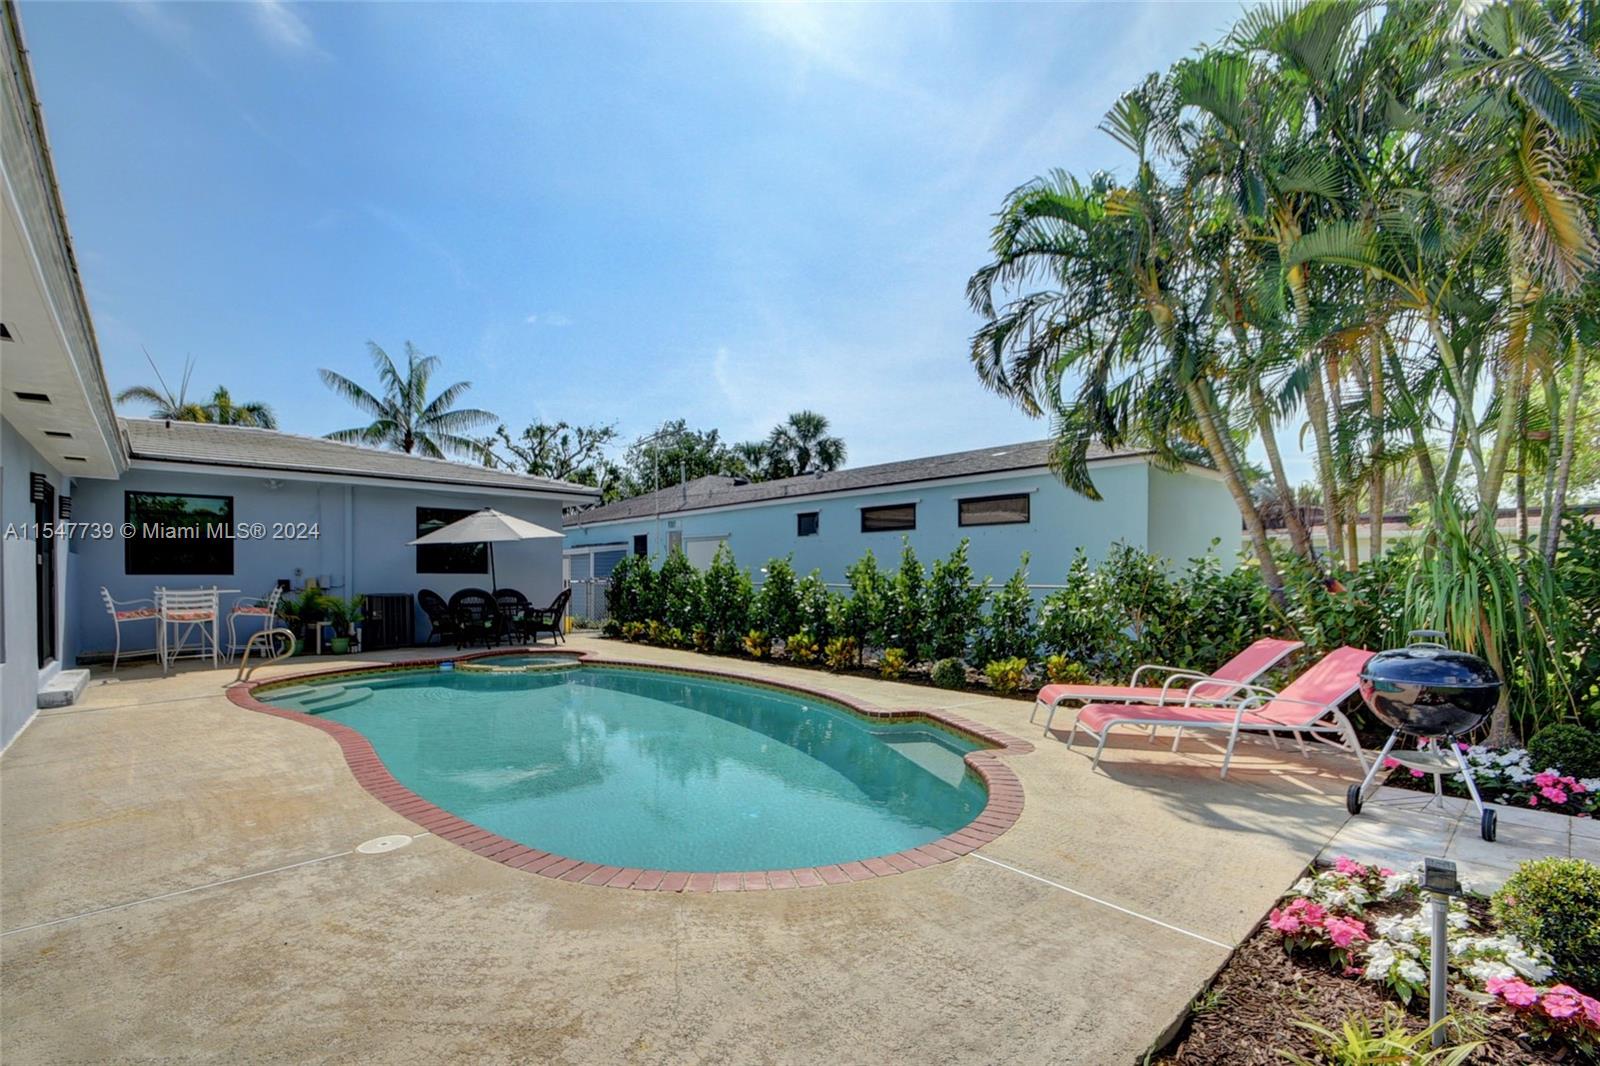 1023 S Palmway, Lake Worth, Palm Beach County, Florida - 4 Bedrooms  
3 Bathrooms - 